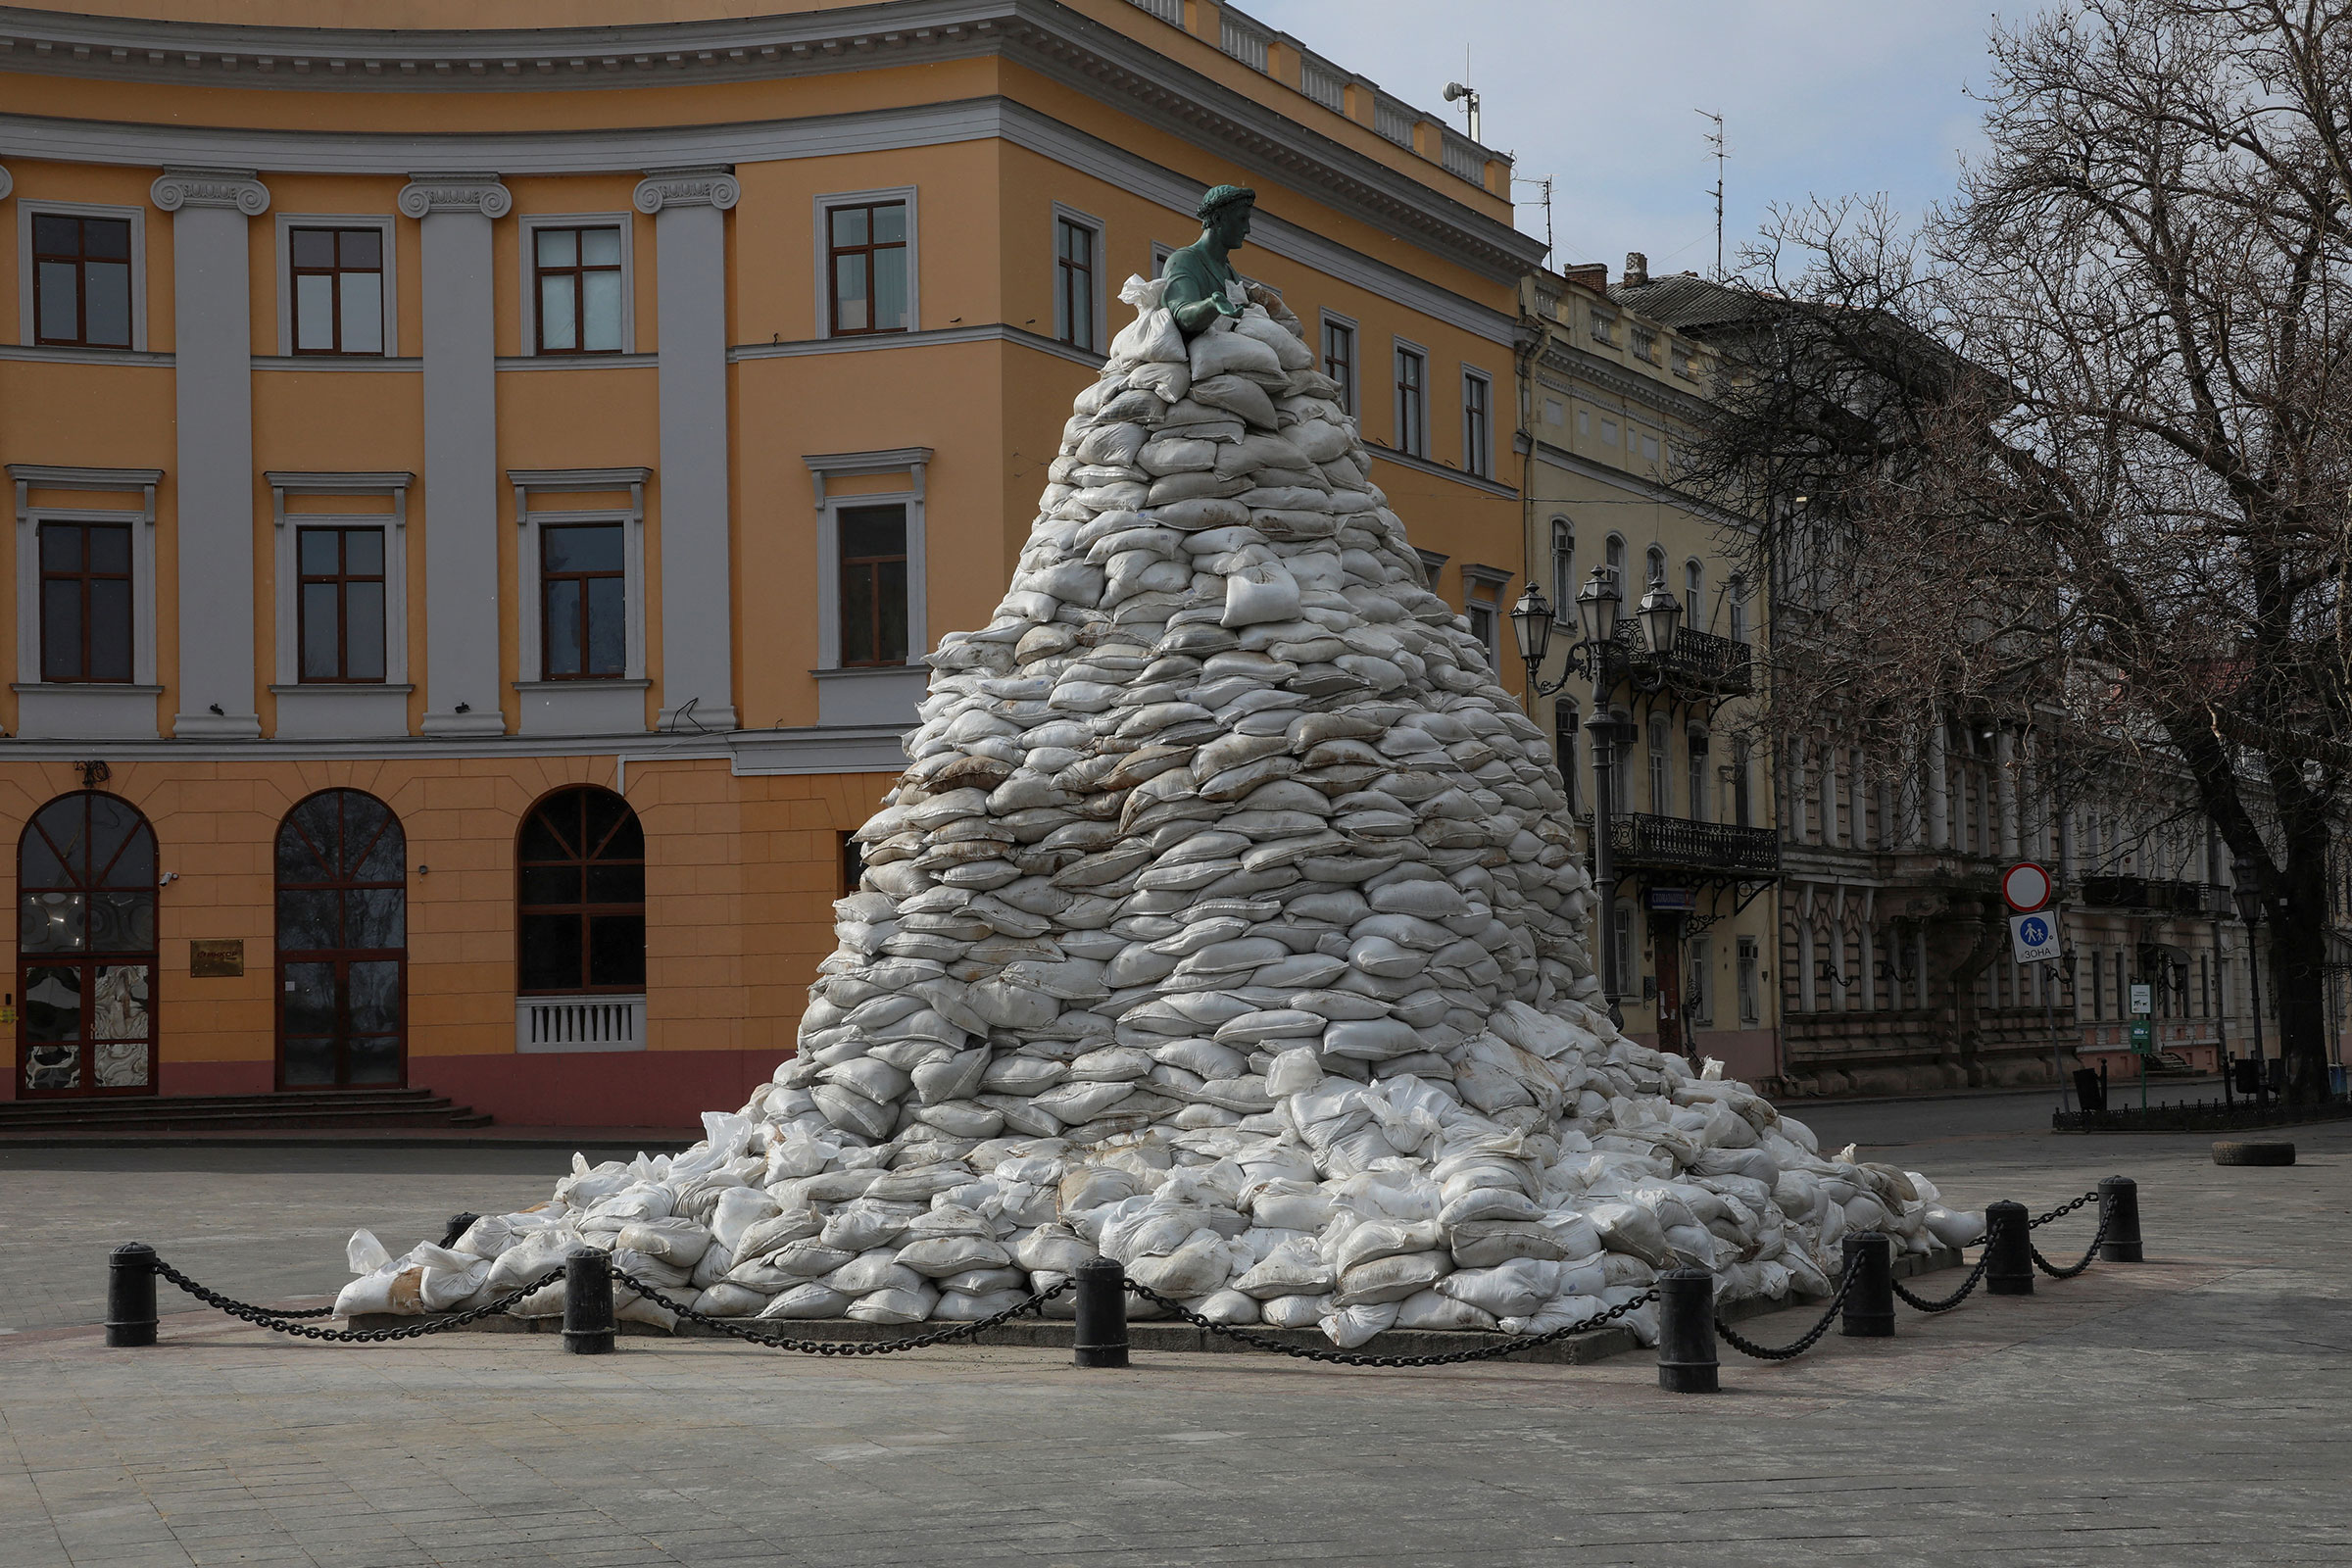 A monument of the city founder Duke de Richelieu is seen covered with sand bags for protection, amid Russia's invasion of Ukraine, in central Odessa on March 9. (Liashonok Nina—Reuters)